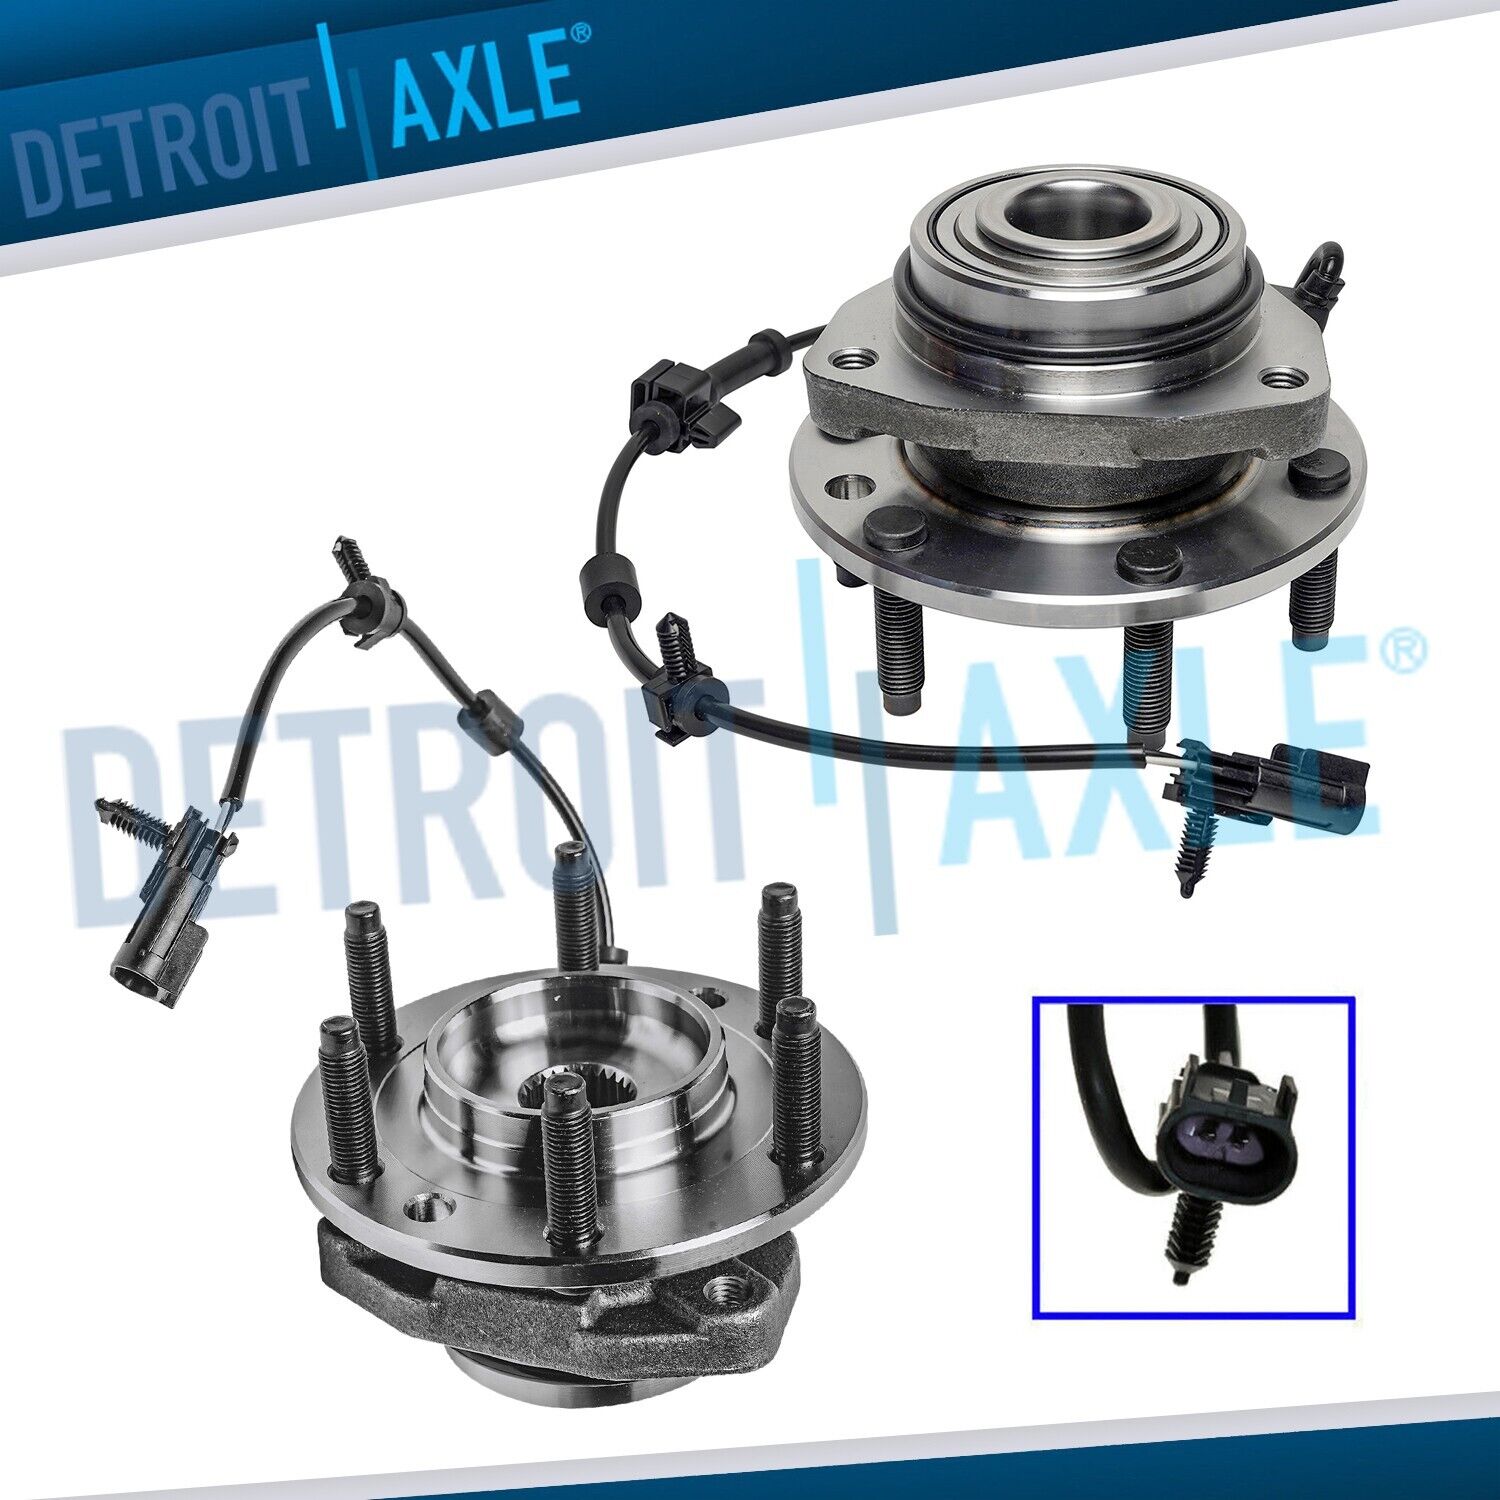 Front Wheel Bearing and Hubs for Chevy Trailblazer GMC Envoy Buick Rainier Olds.